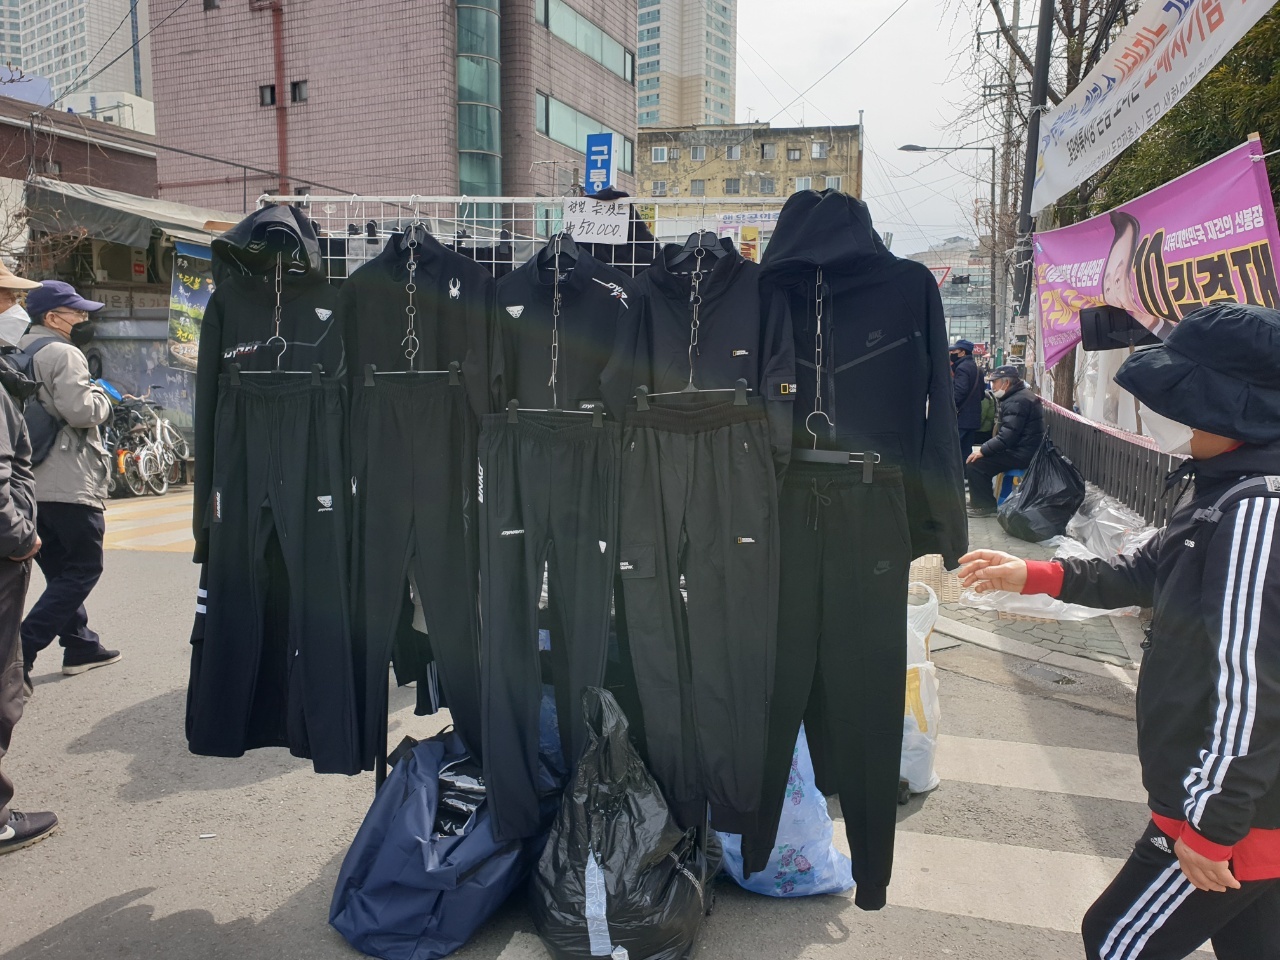 Hoodies and sweaters of the “techwear” style, popular among the younger generations, are on display. (Choi Jae-hee / The Korea Herald)